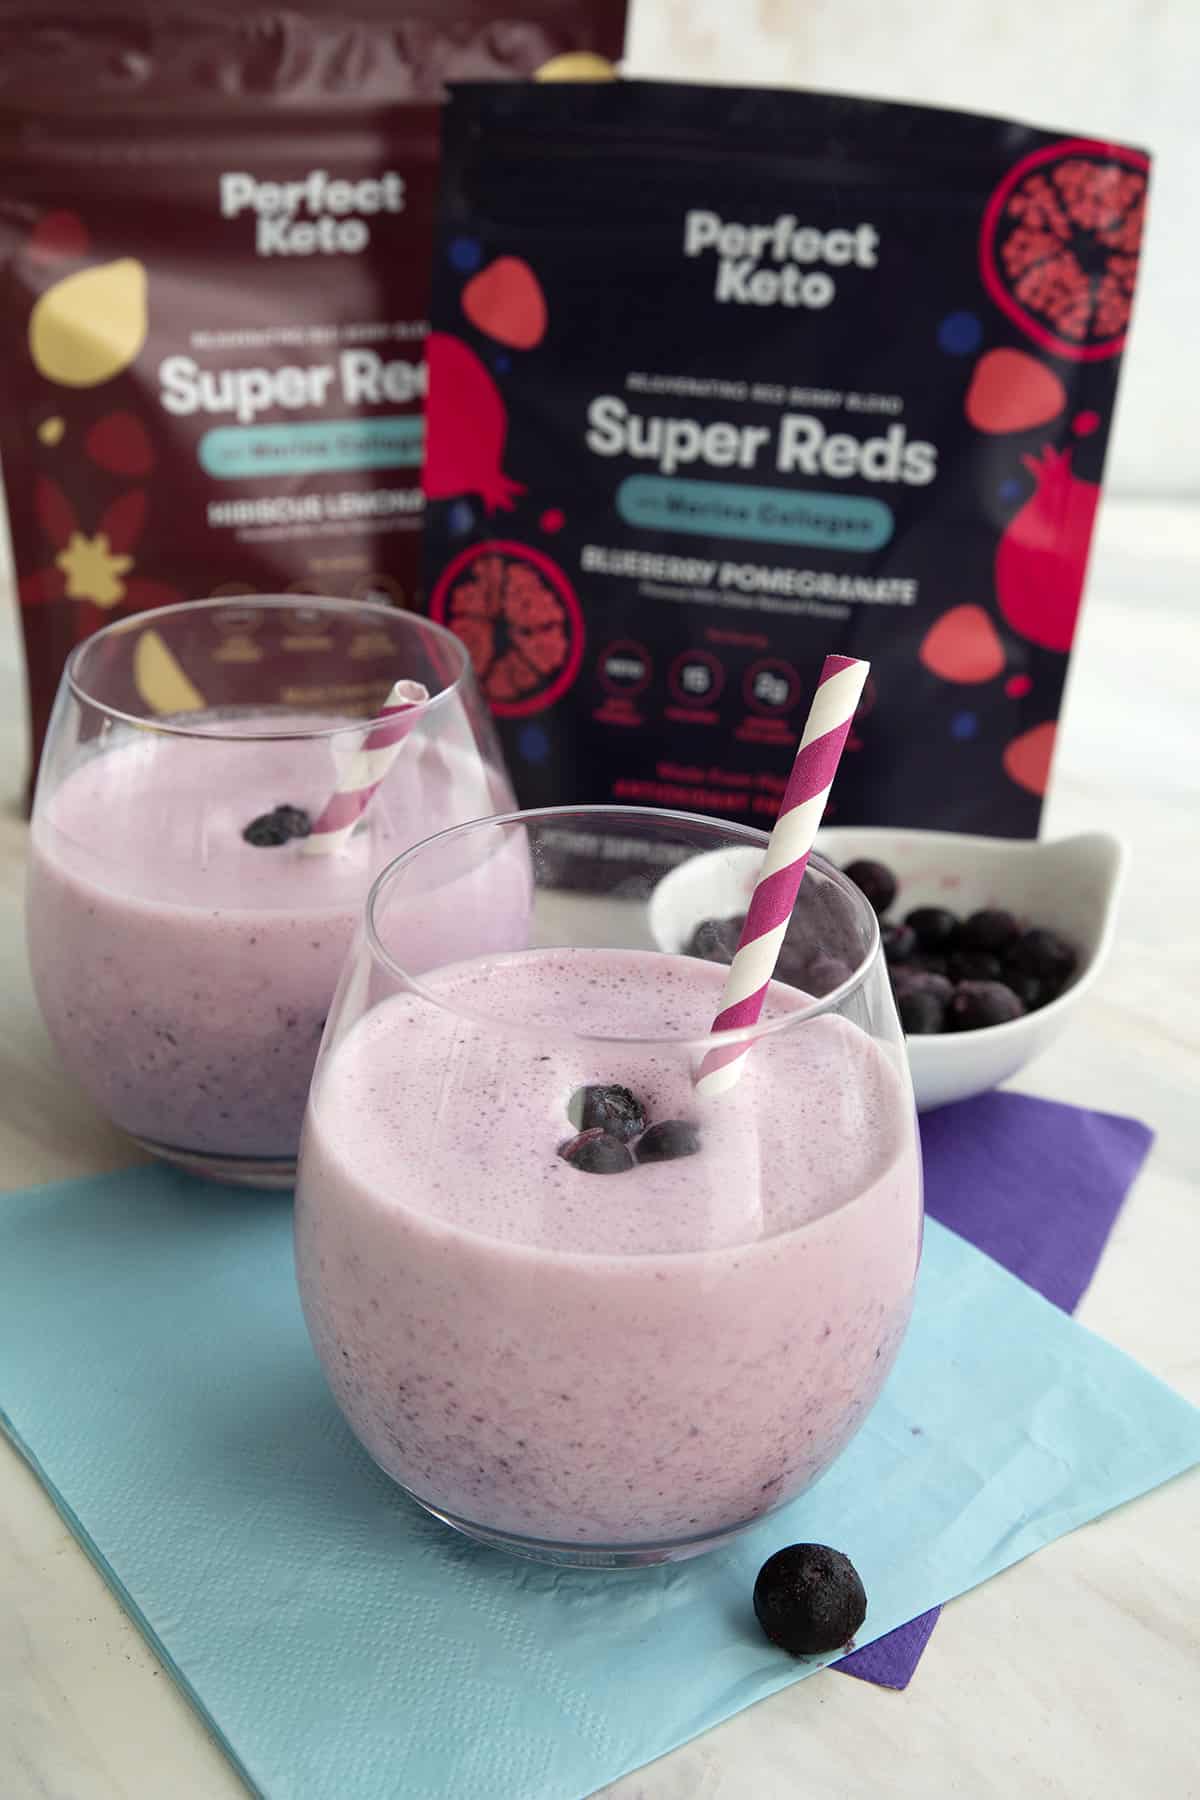 Keto blueberry smoothies with packages of Super Reds antioxidant blend in the background.